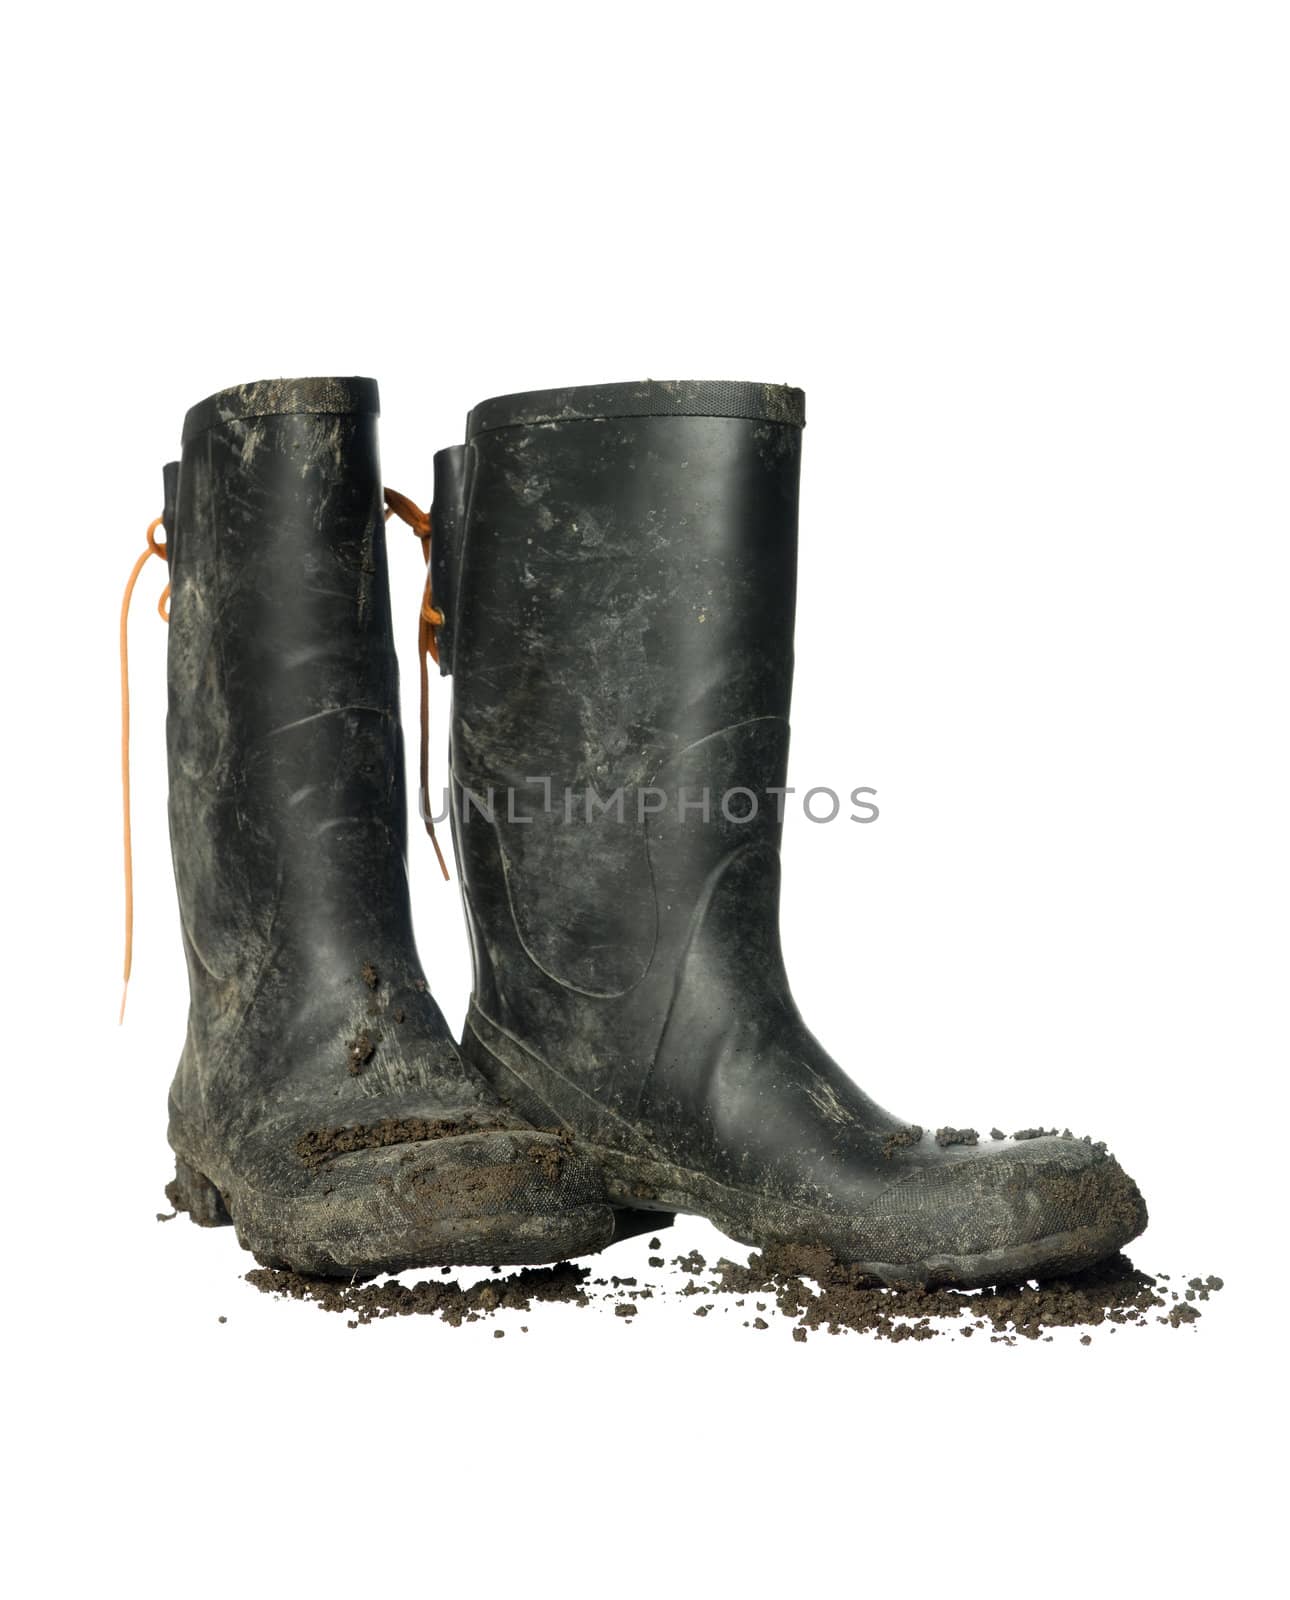 dirty boots by gemenacom